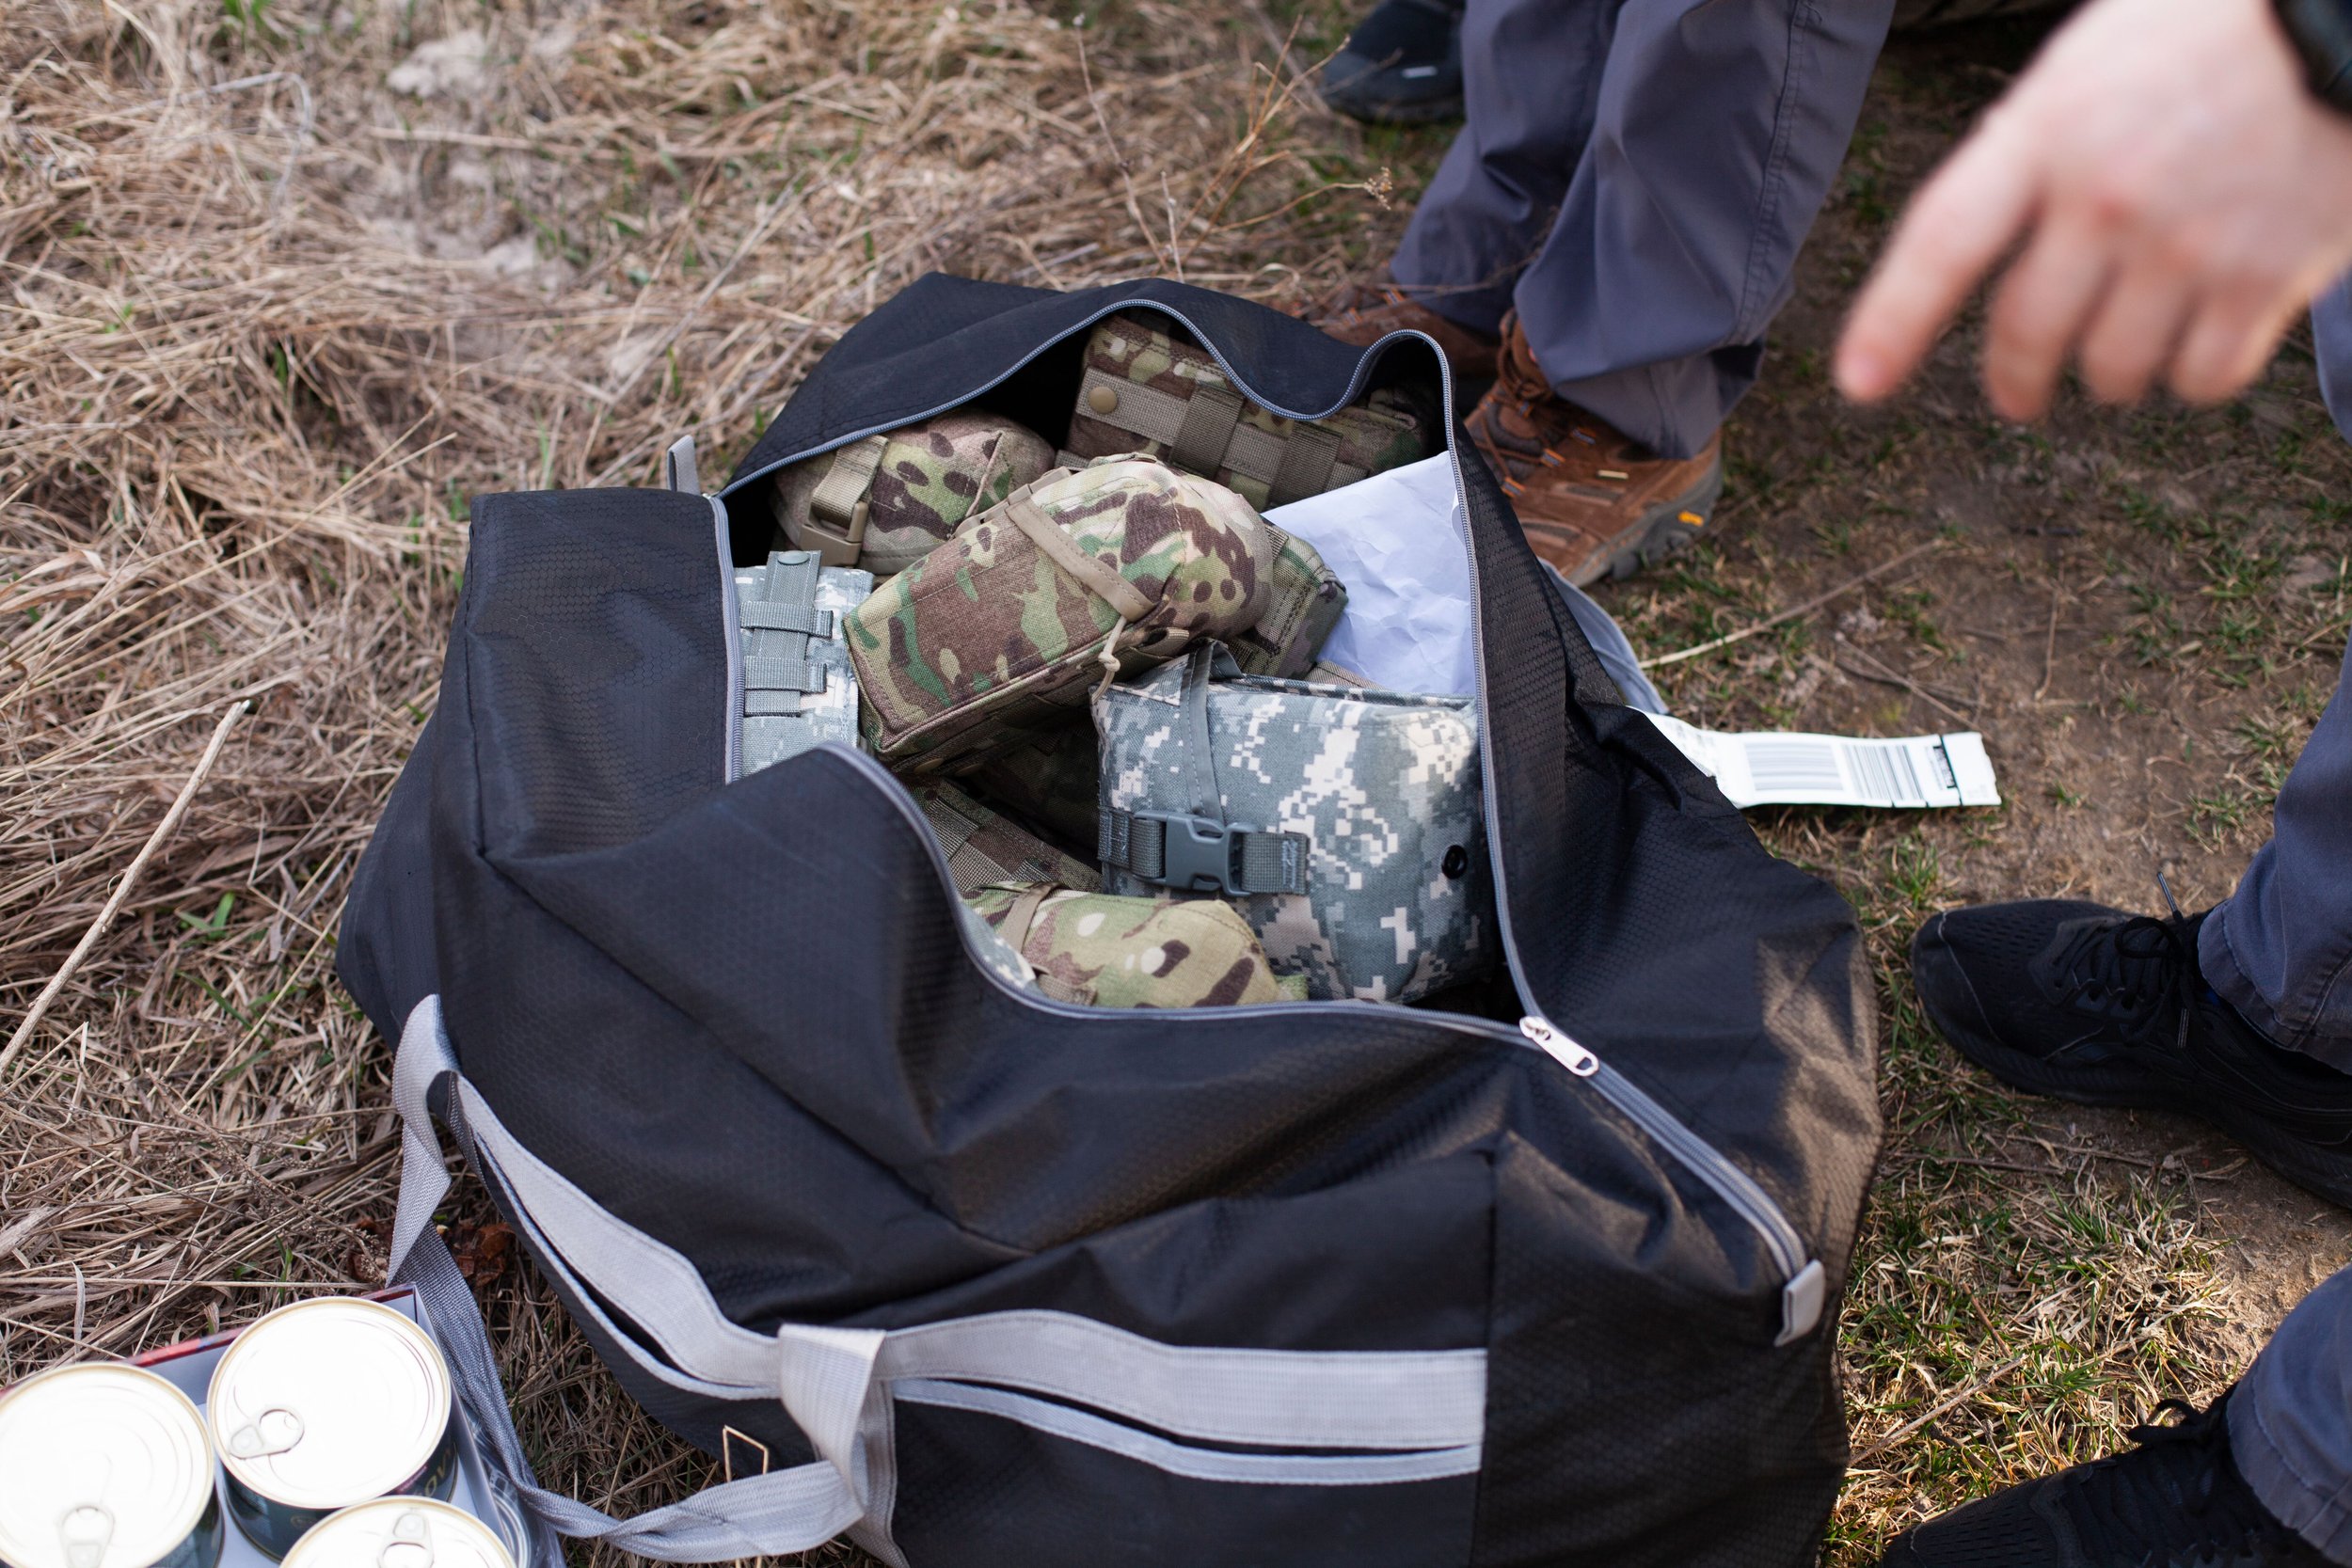 One of the duffel bags after arriving in Ukraine